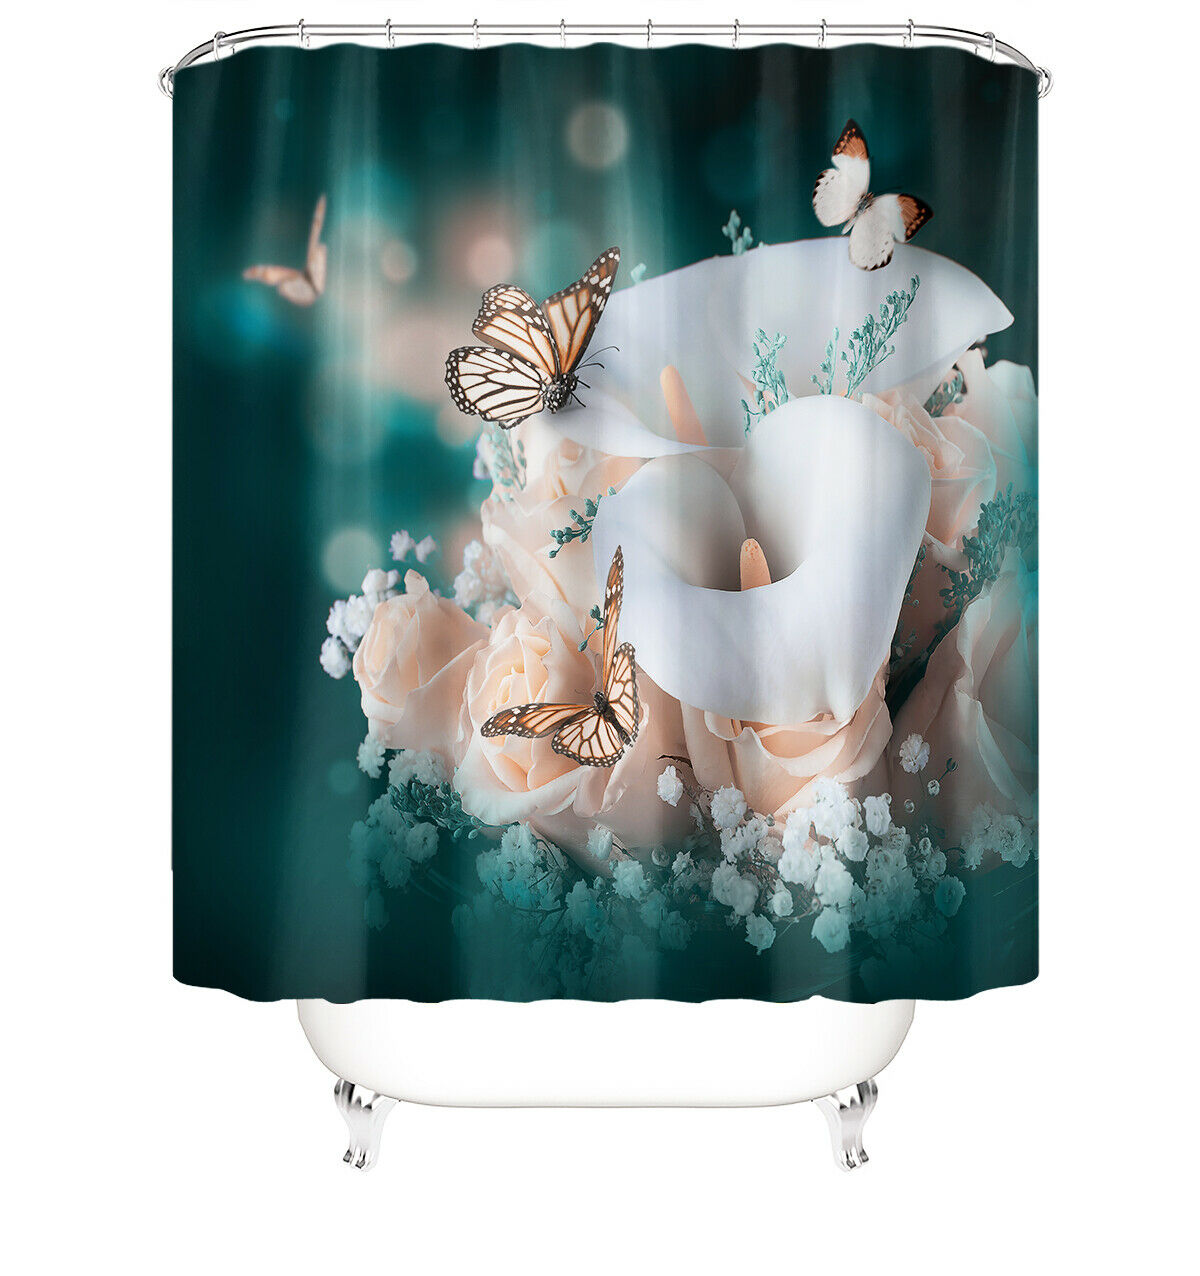 Butterflies and Flower Shower Curtain Bathroom Rug Set Bath Mat Toilet Lid Cover-180×180cm Shower Curtain Only-Free Shipping at meselling99